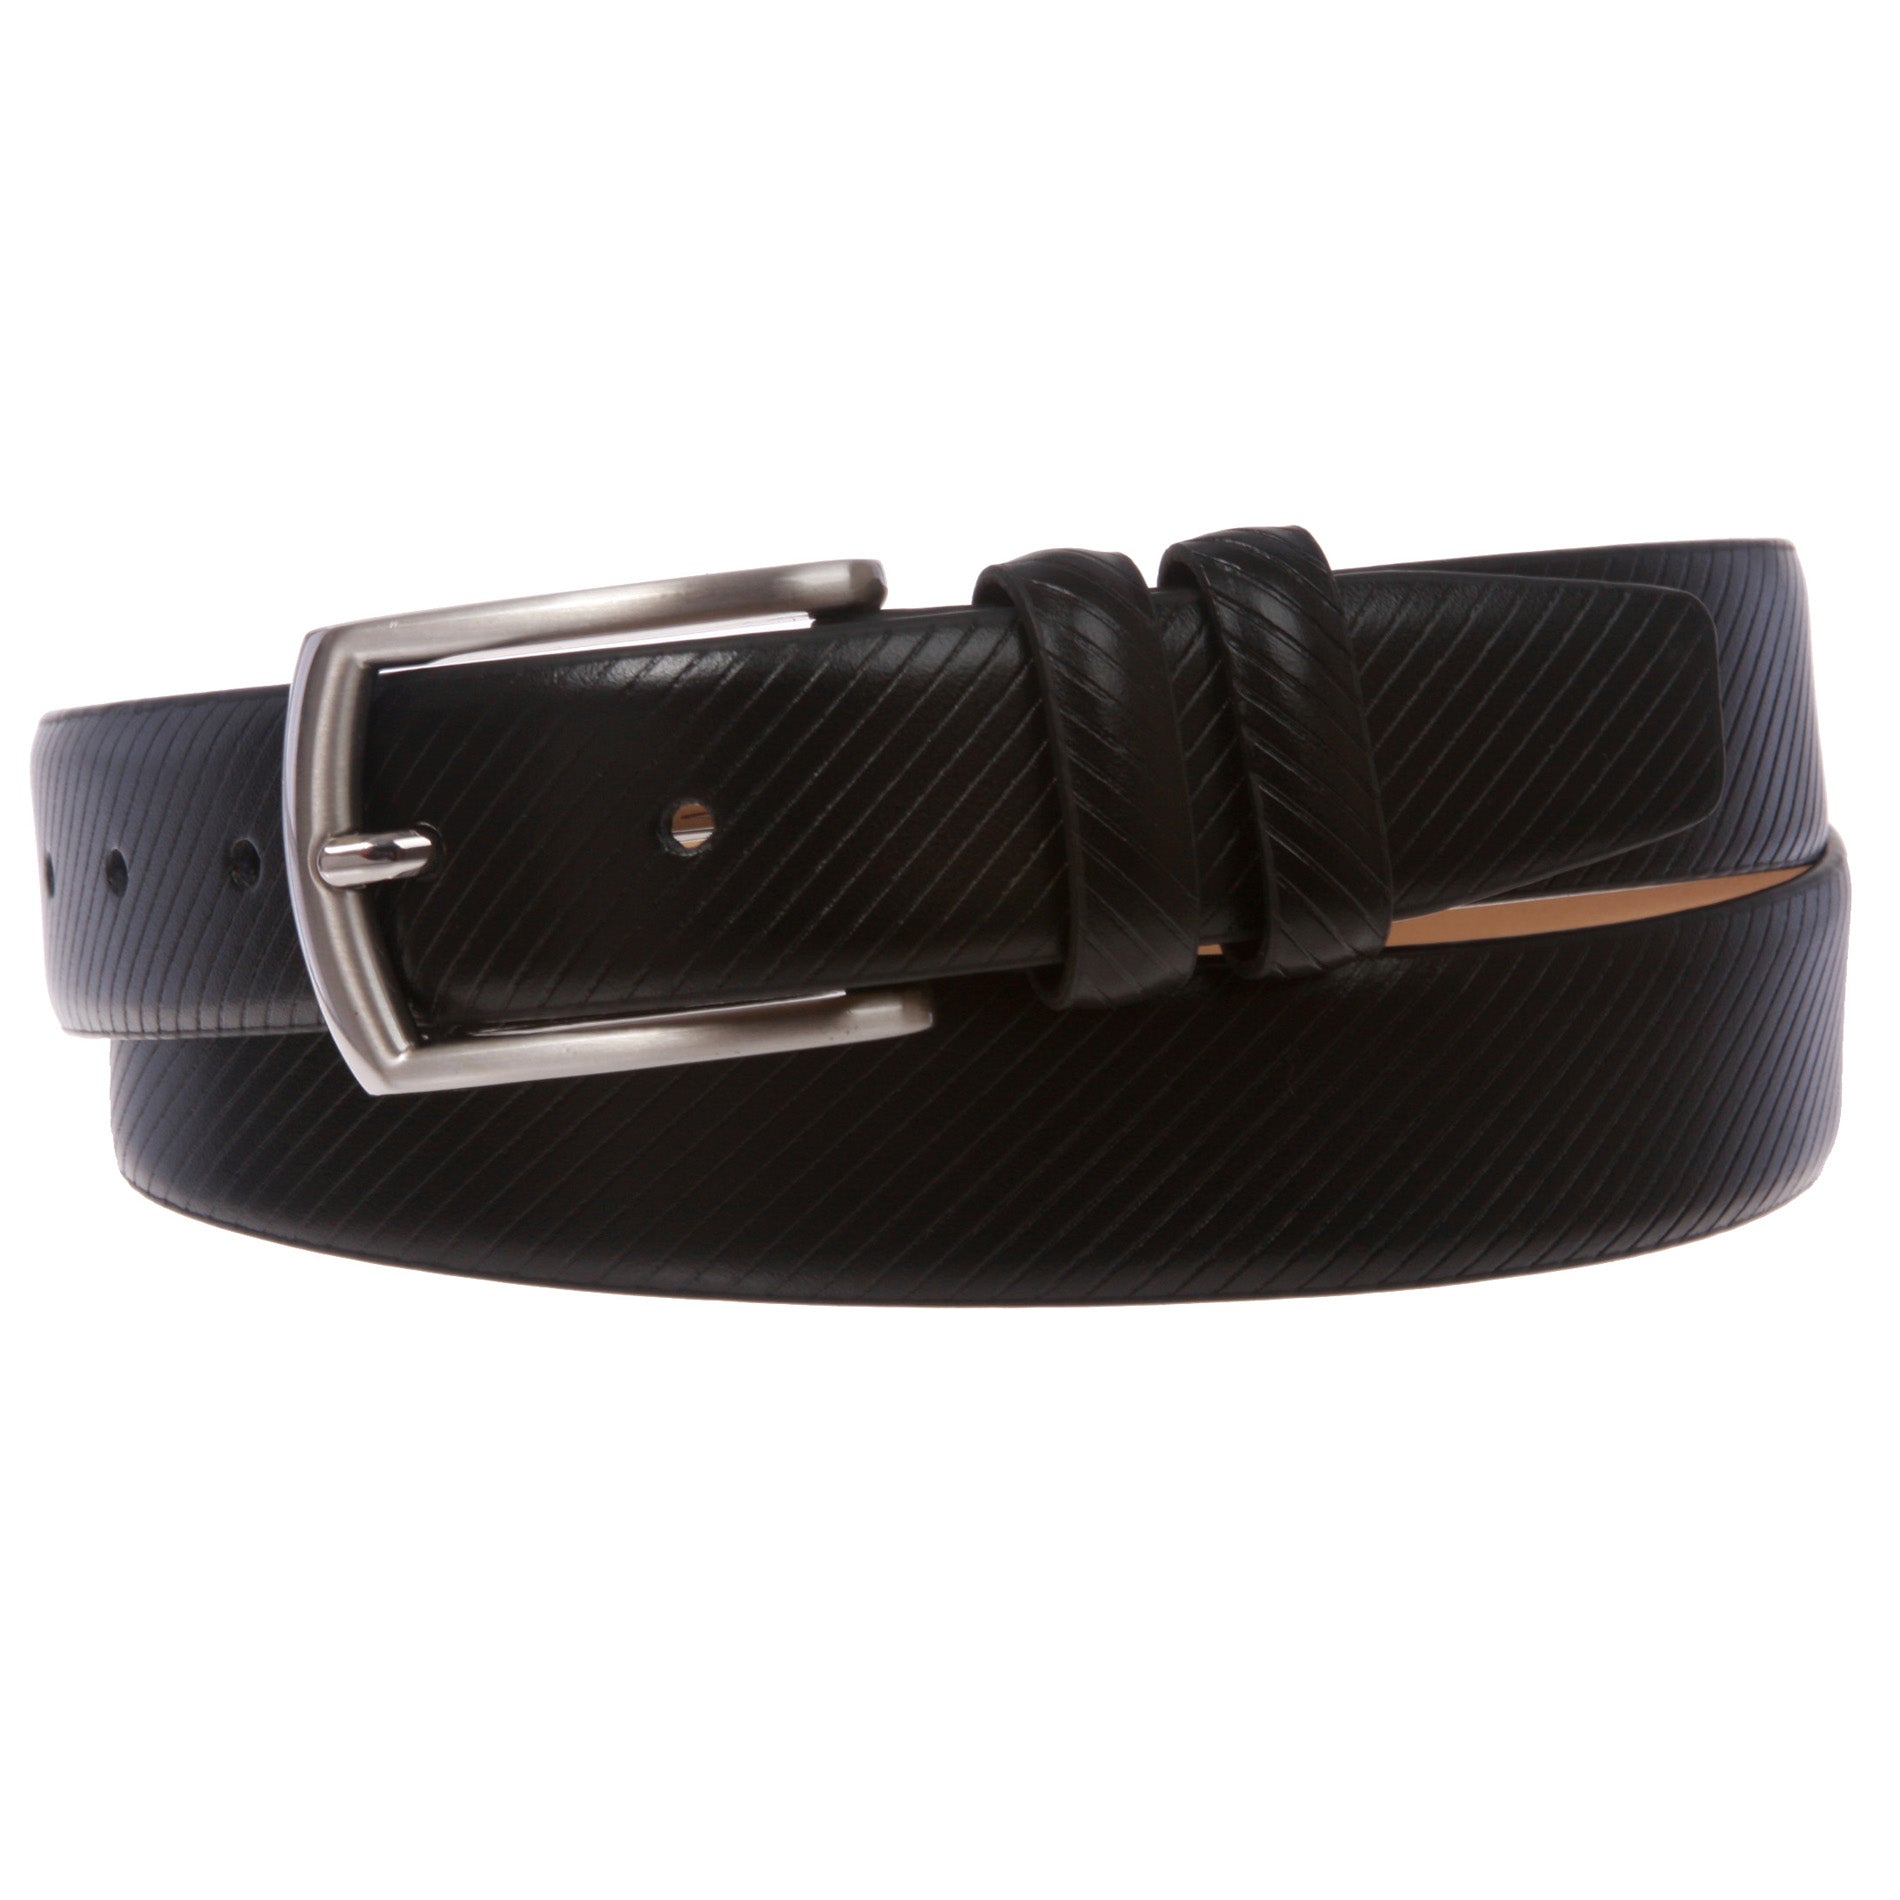 Men's 1 1/8" (30 mm) Classic Feather Edged Leather Dress Belt